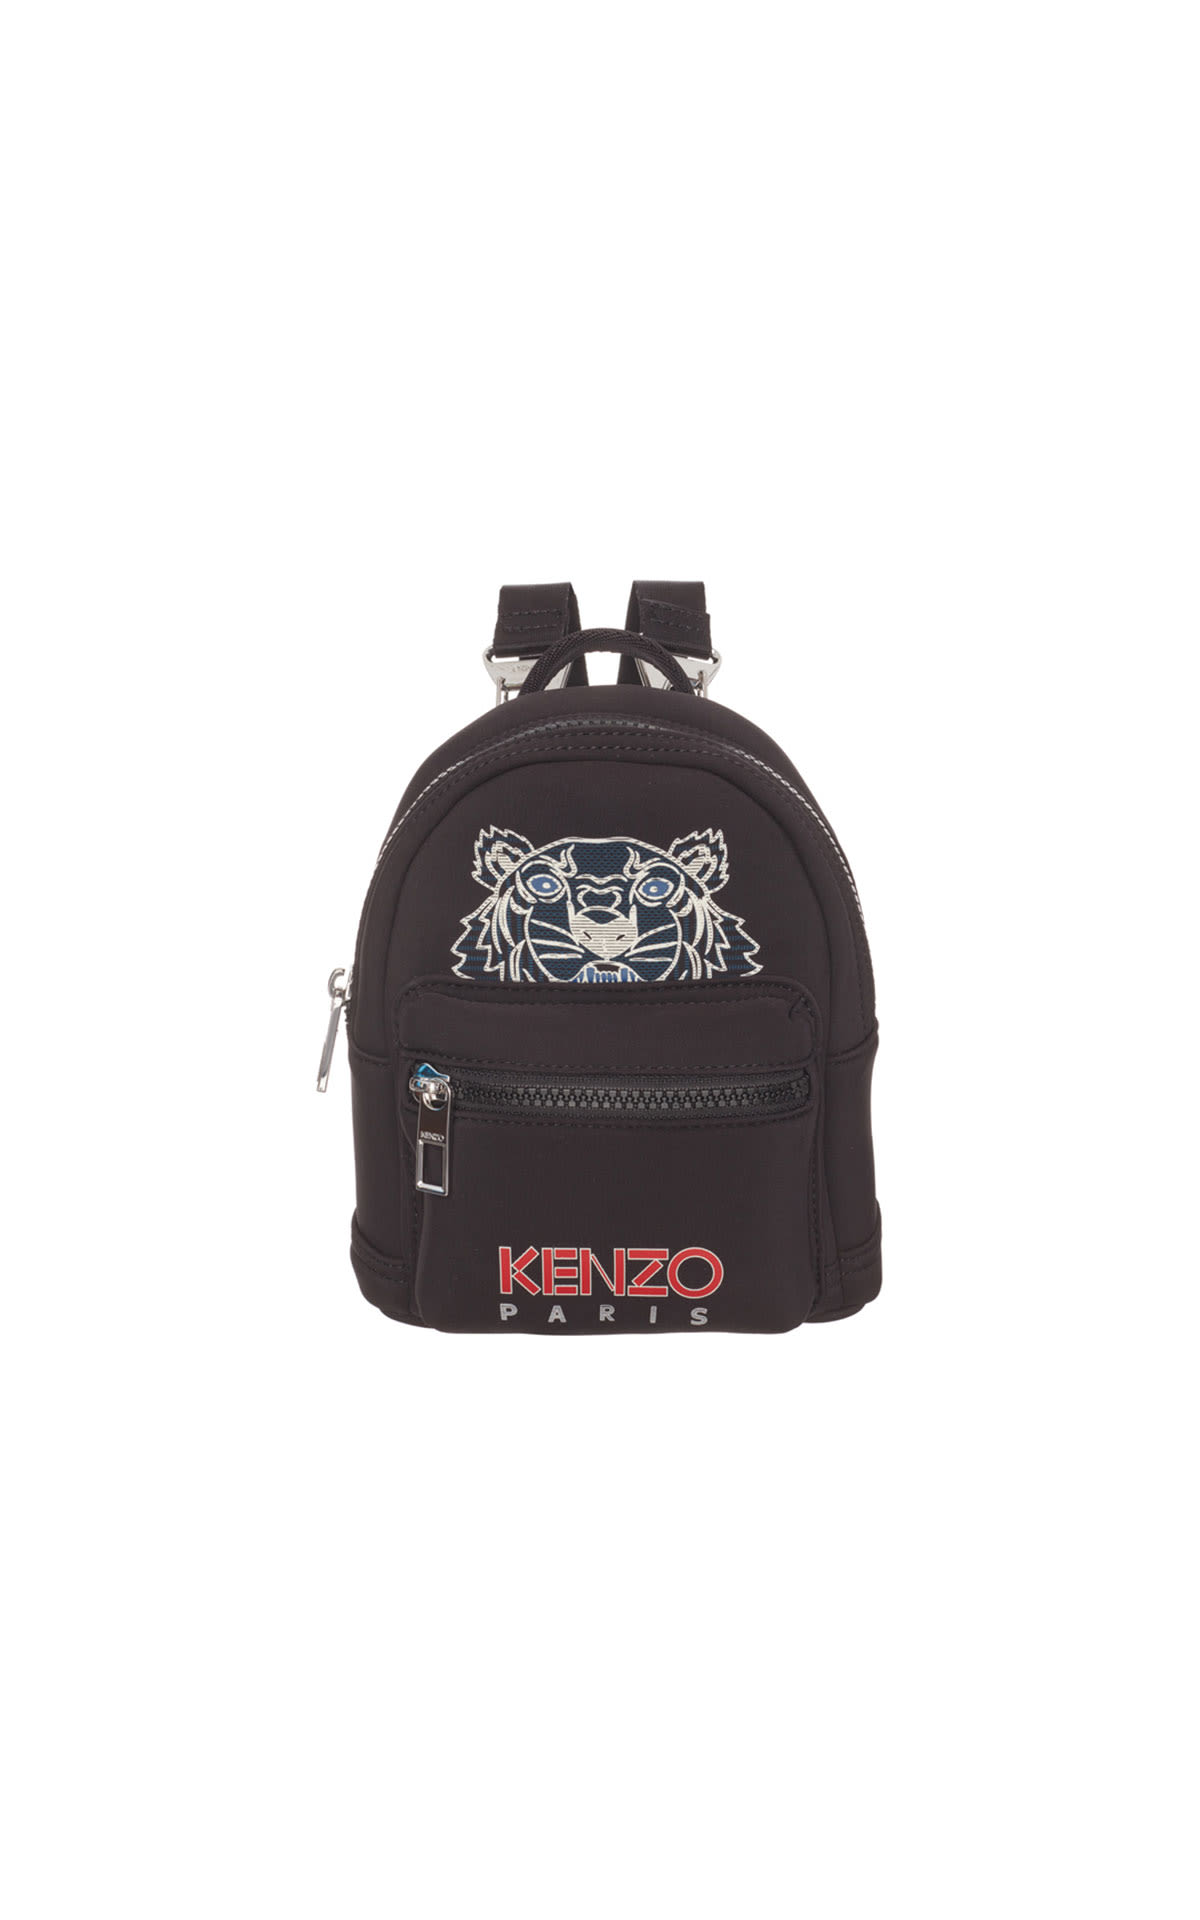 Kenzo Mini backpack from Bicester Village